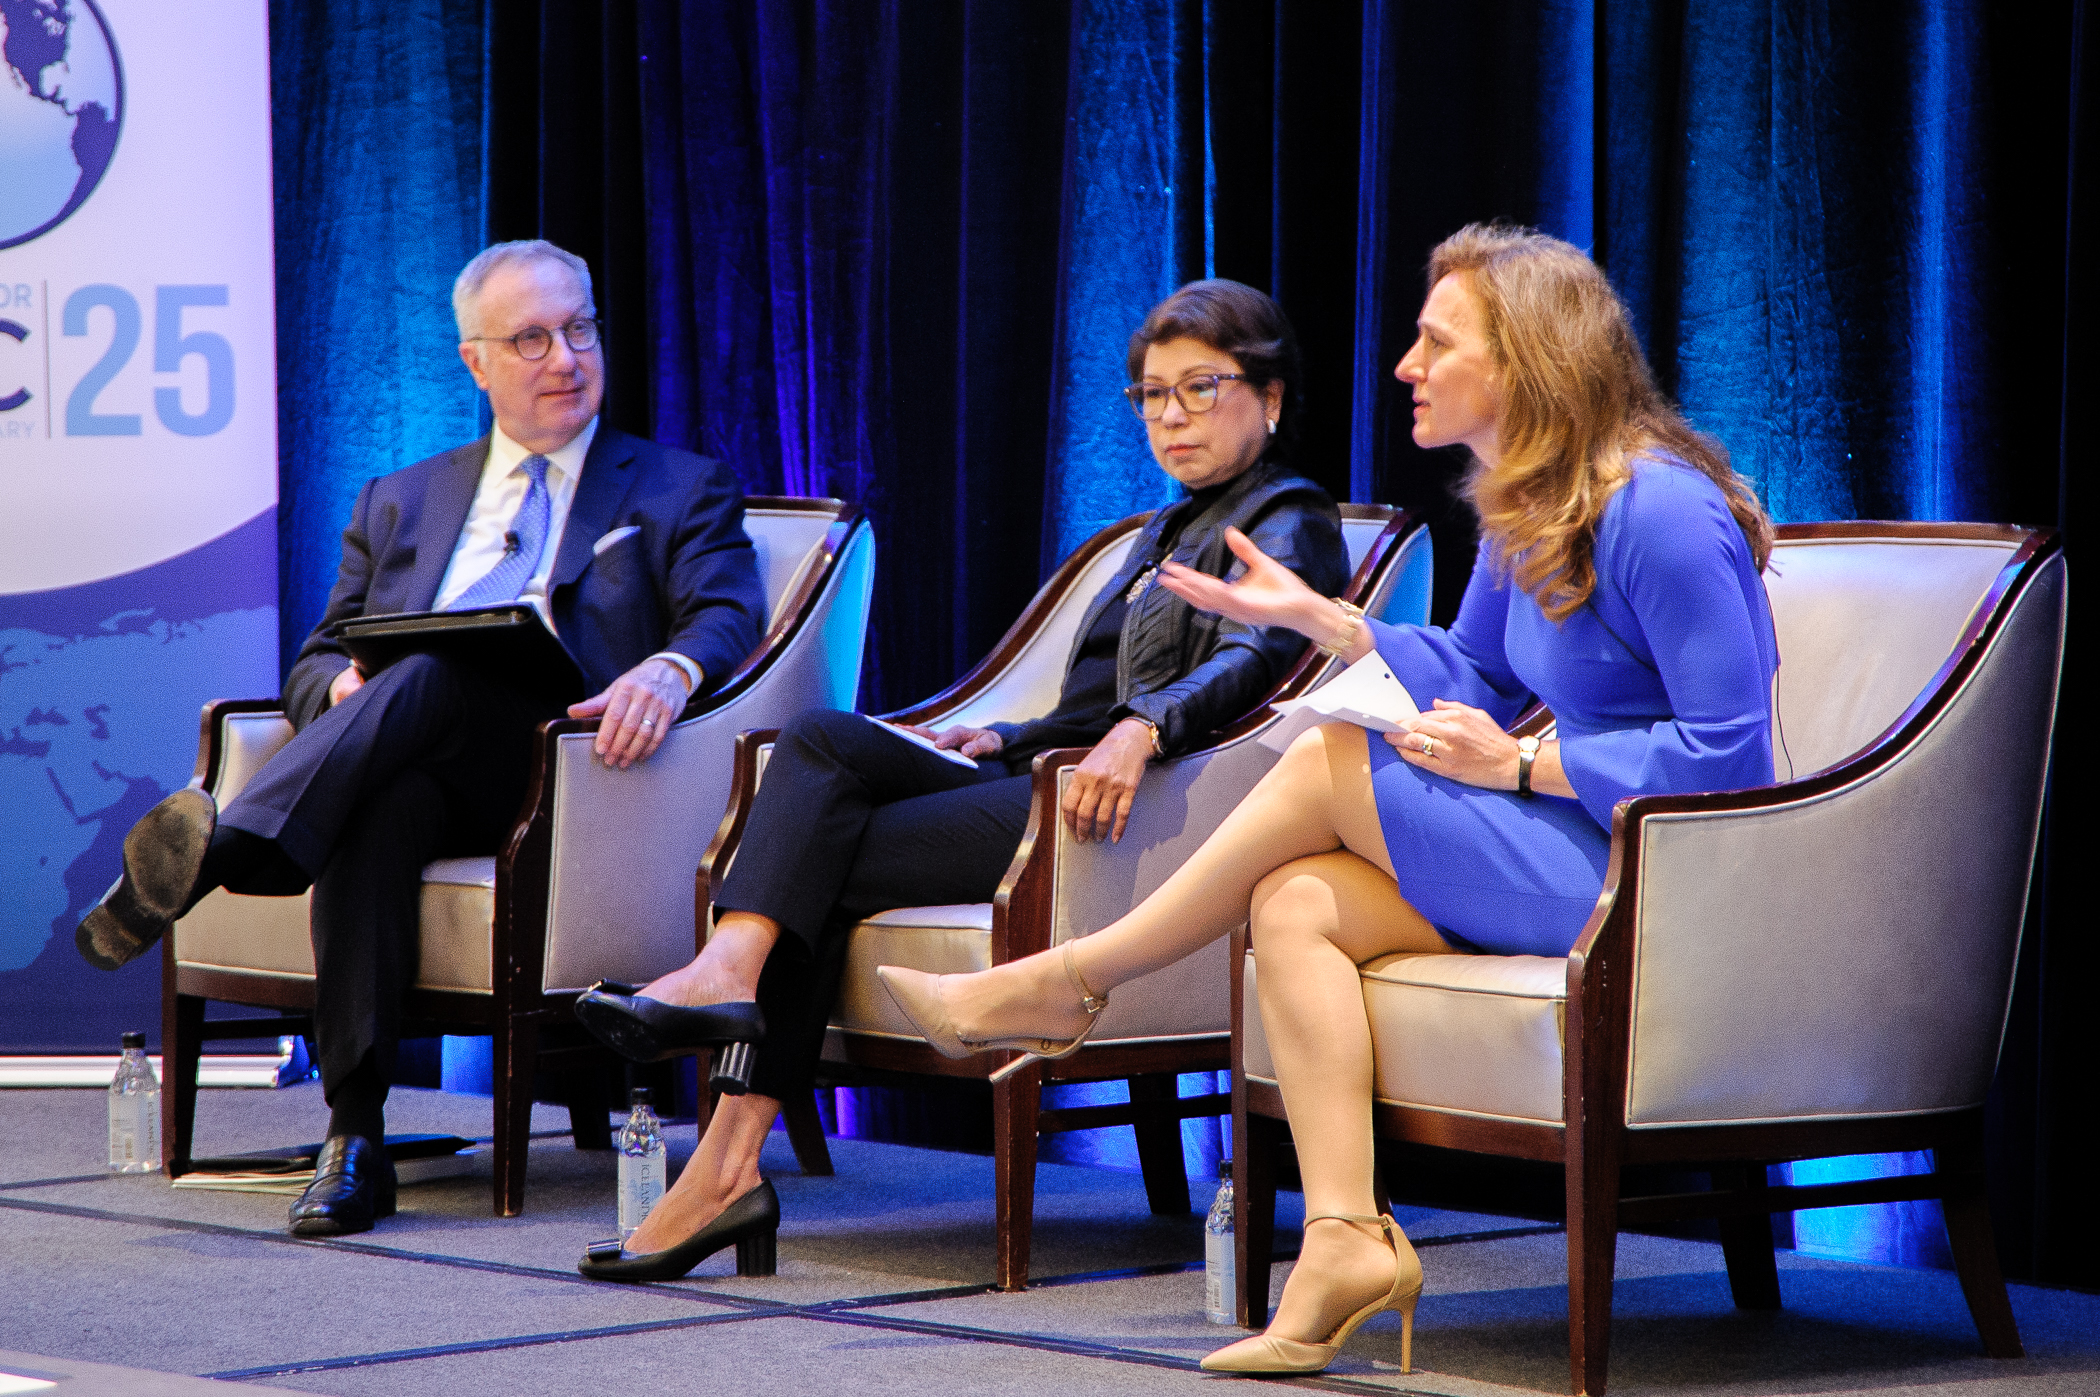 NCAPEC Photo Blog: Looking back at the 2019 Executive Roundtable and ...